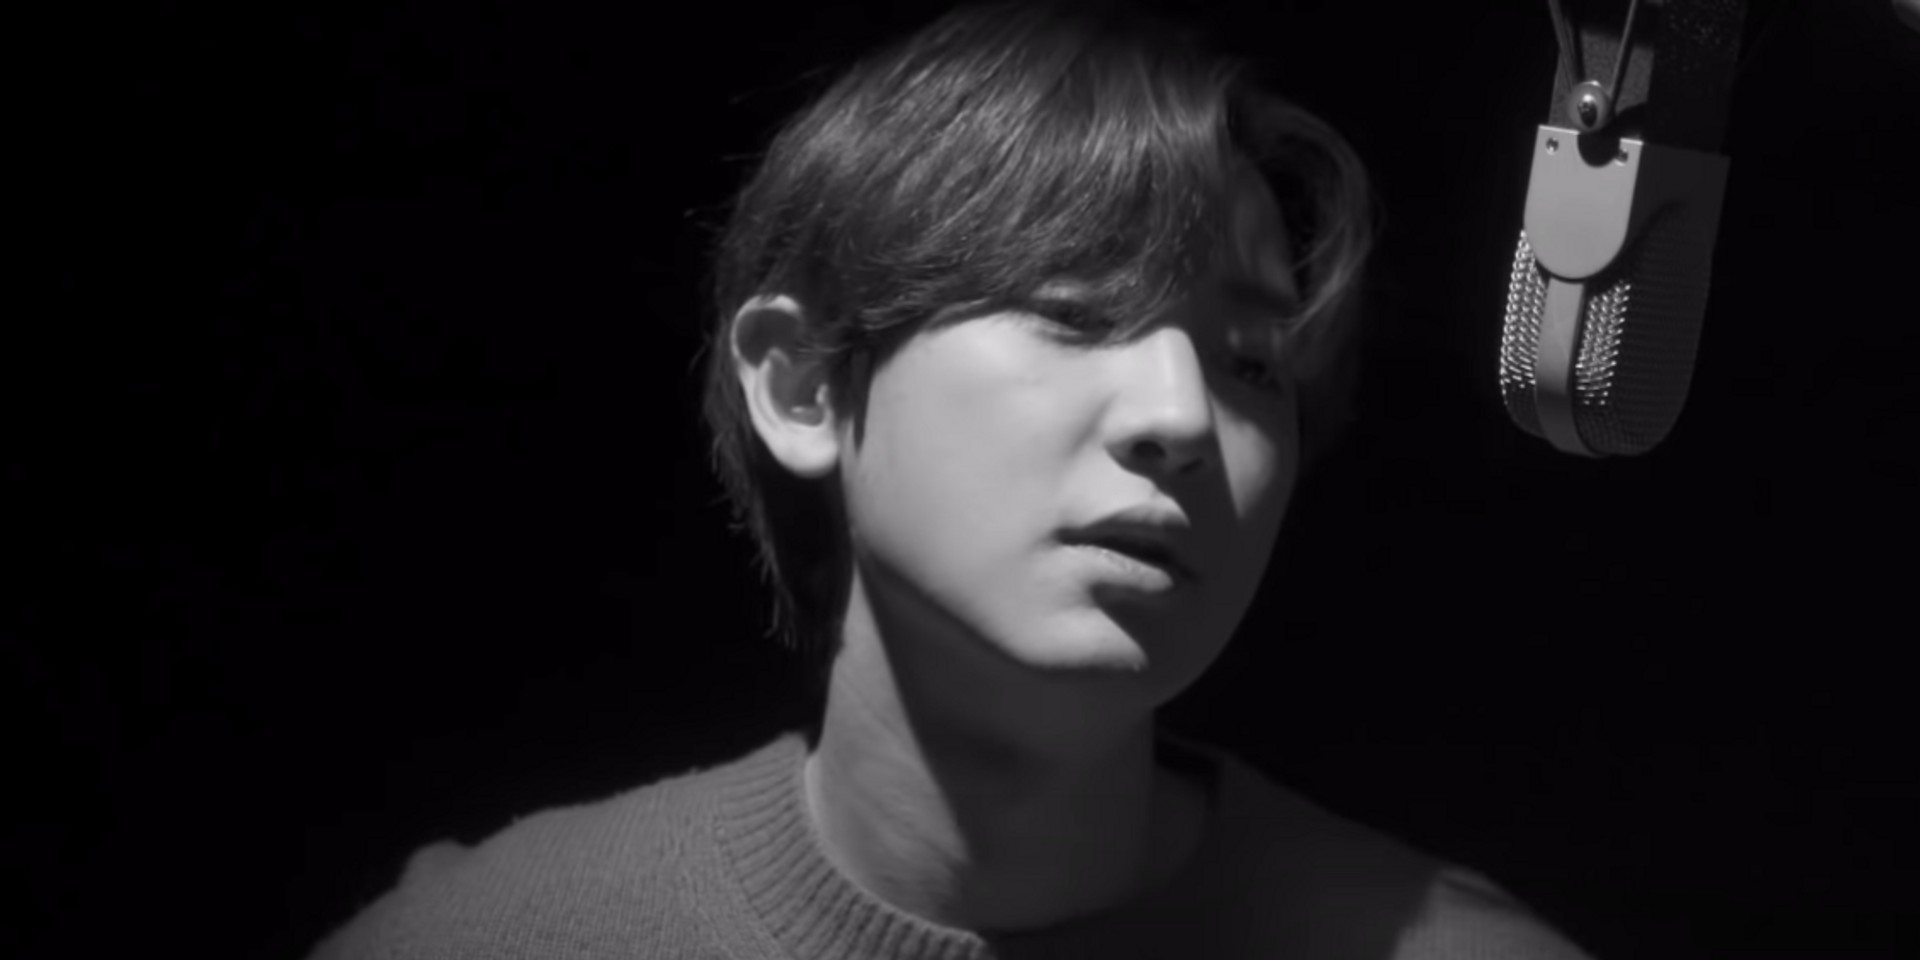 EXO's Chanyeol reimagines 'Without You' for musical film 'The Box' - listen